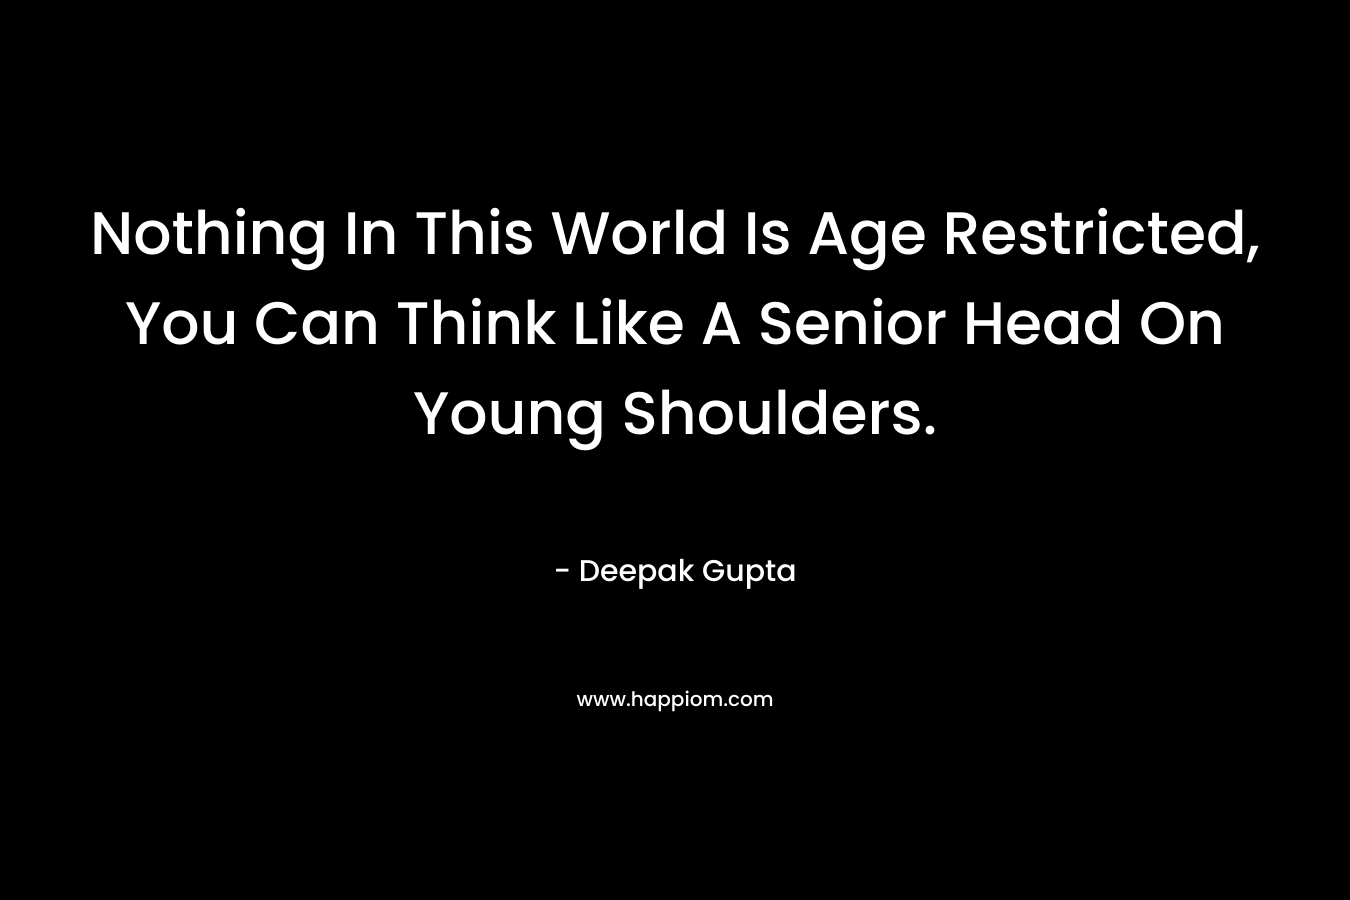 Nothing In This World Is Age Restricted, You Can Think Like A Senior Head On Young Shoulders.